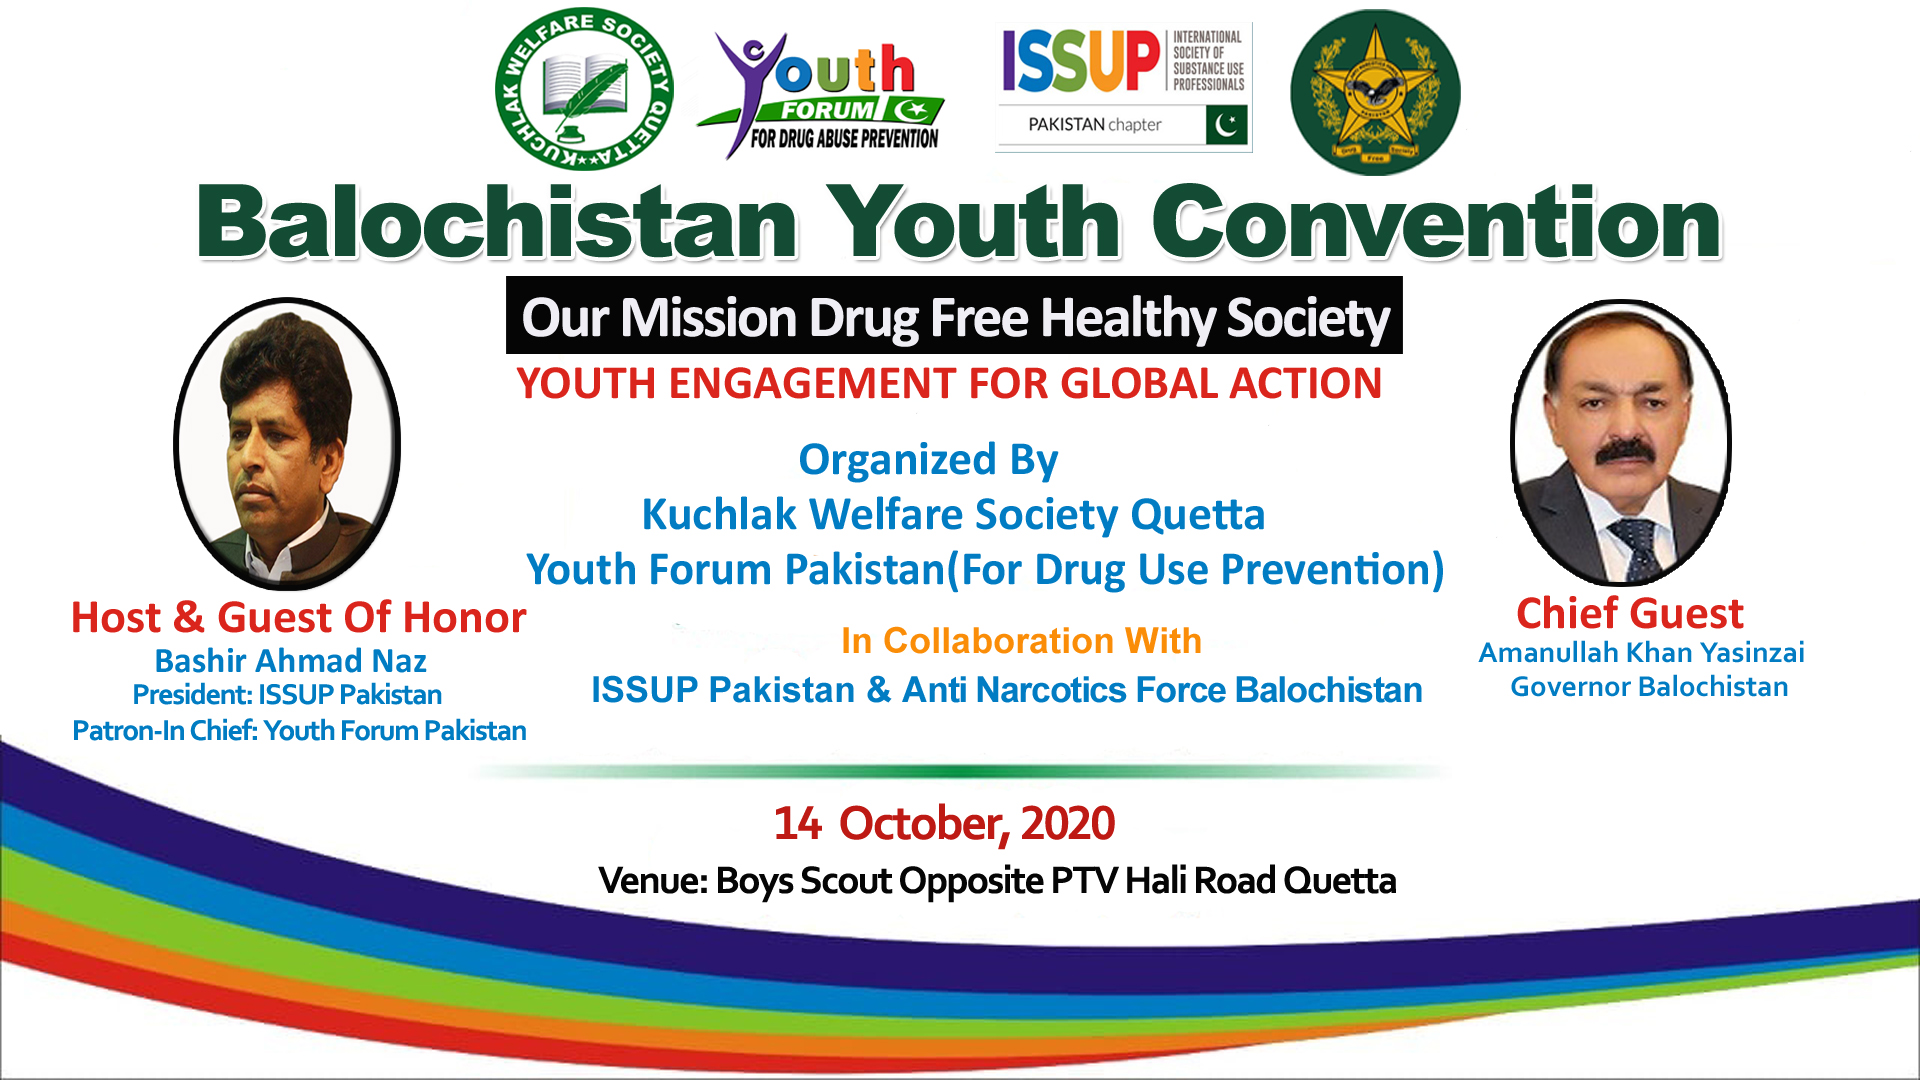 BALOCHISTAN YOUTH CONVENTION BY KUCHLAK WELFARE SOCIETY, YOUTH FORUM PAKISTAN, ISSUP PAKISTAN CHAPTER AND ANF BALOCHISTAN